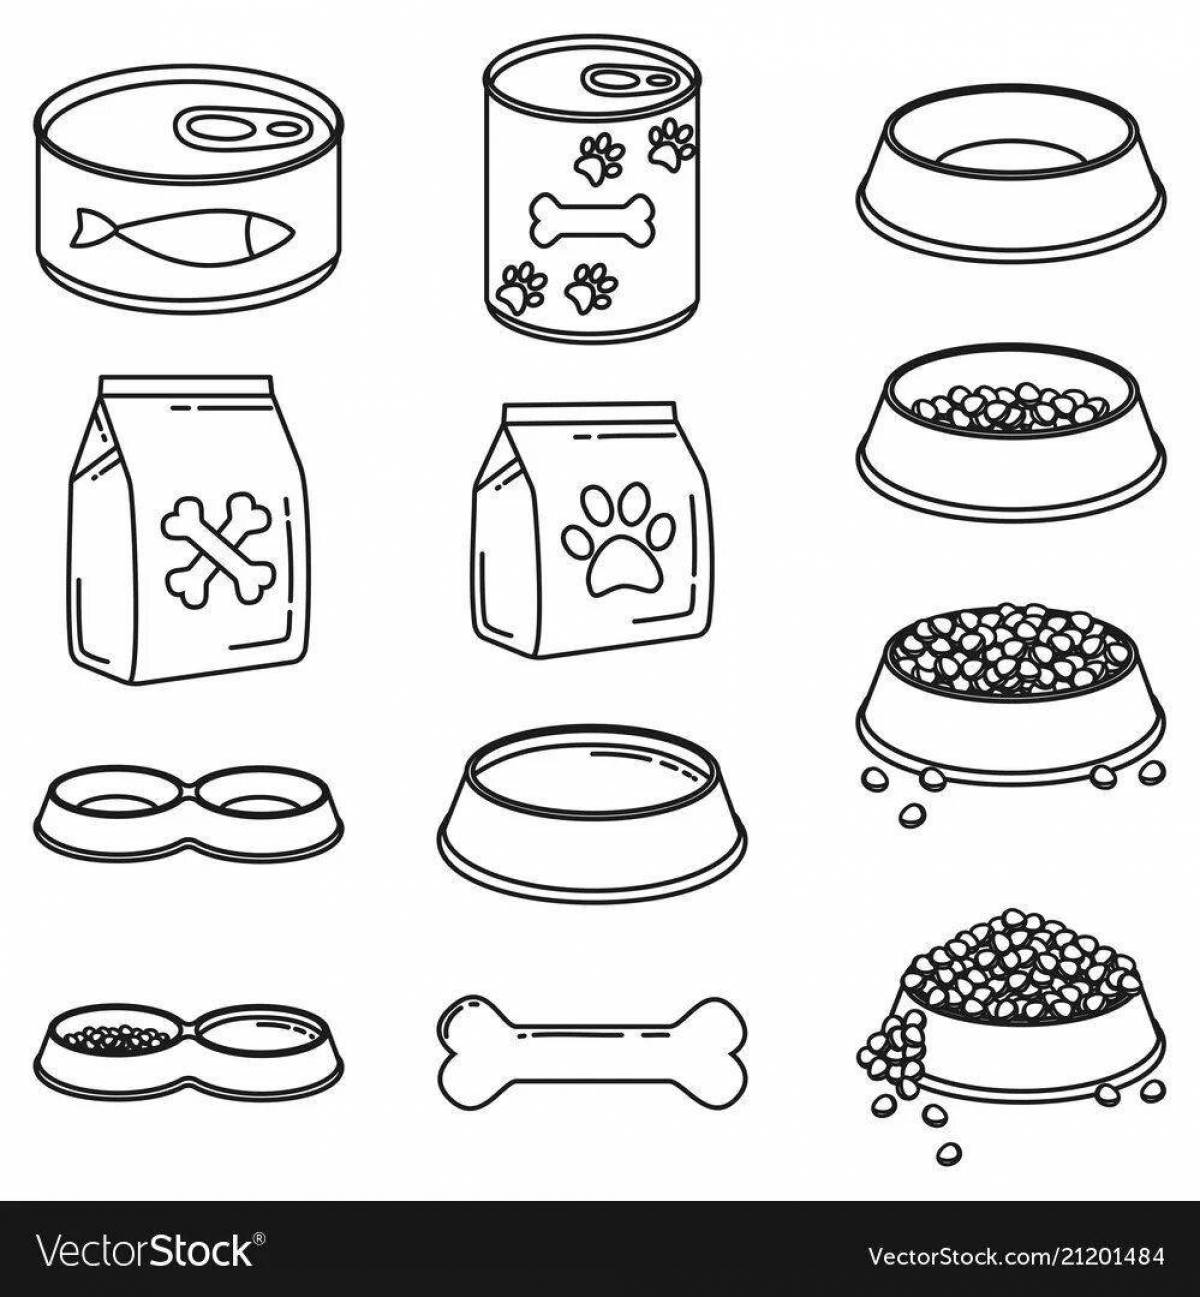 Great cat food coloring page